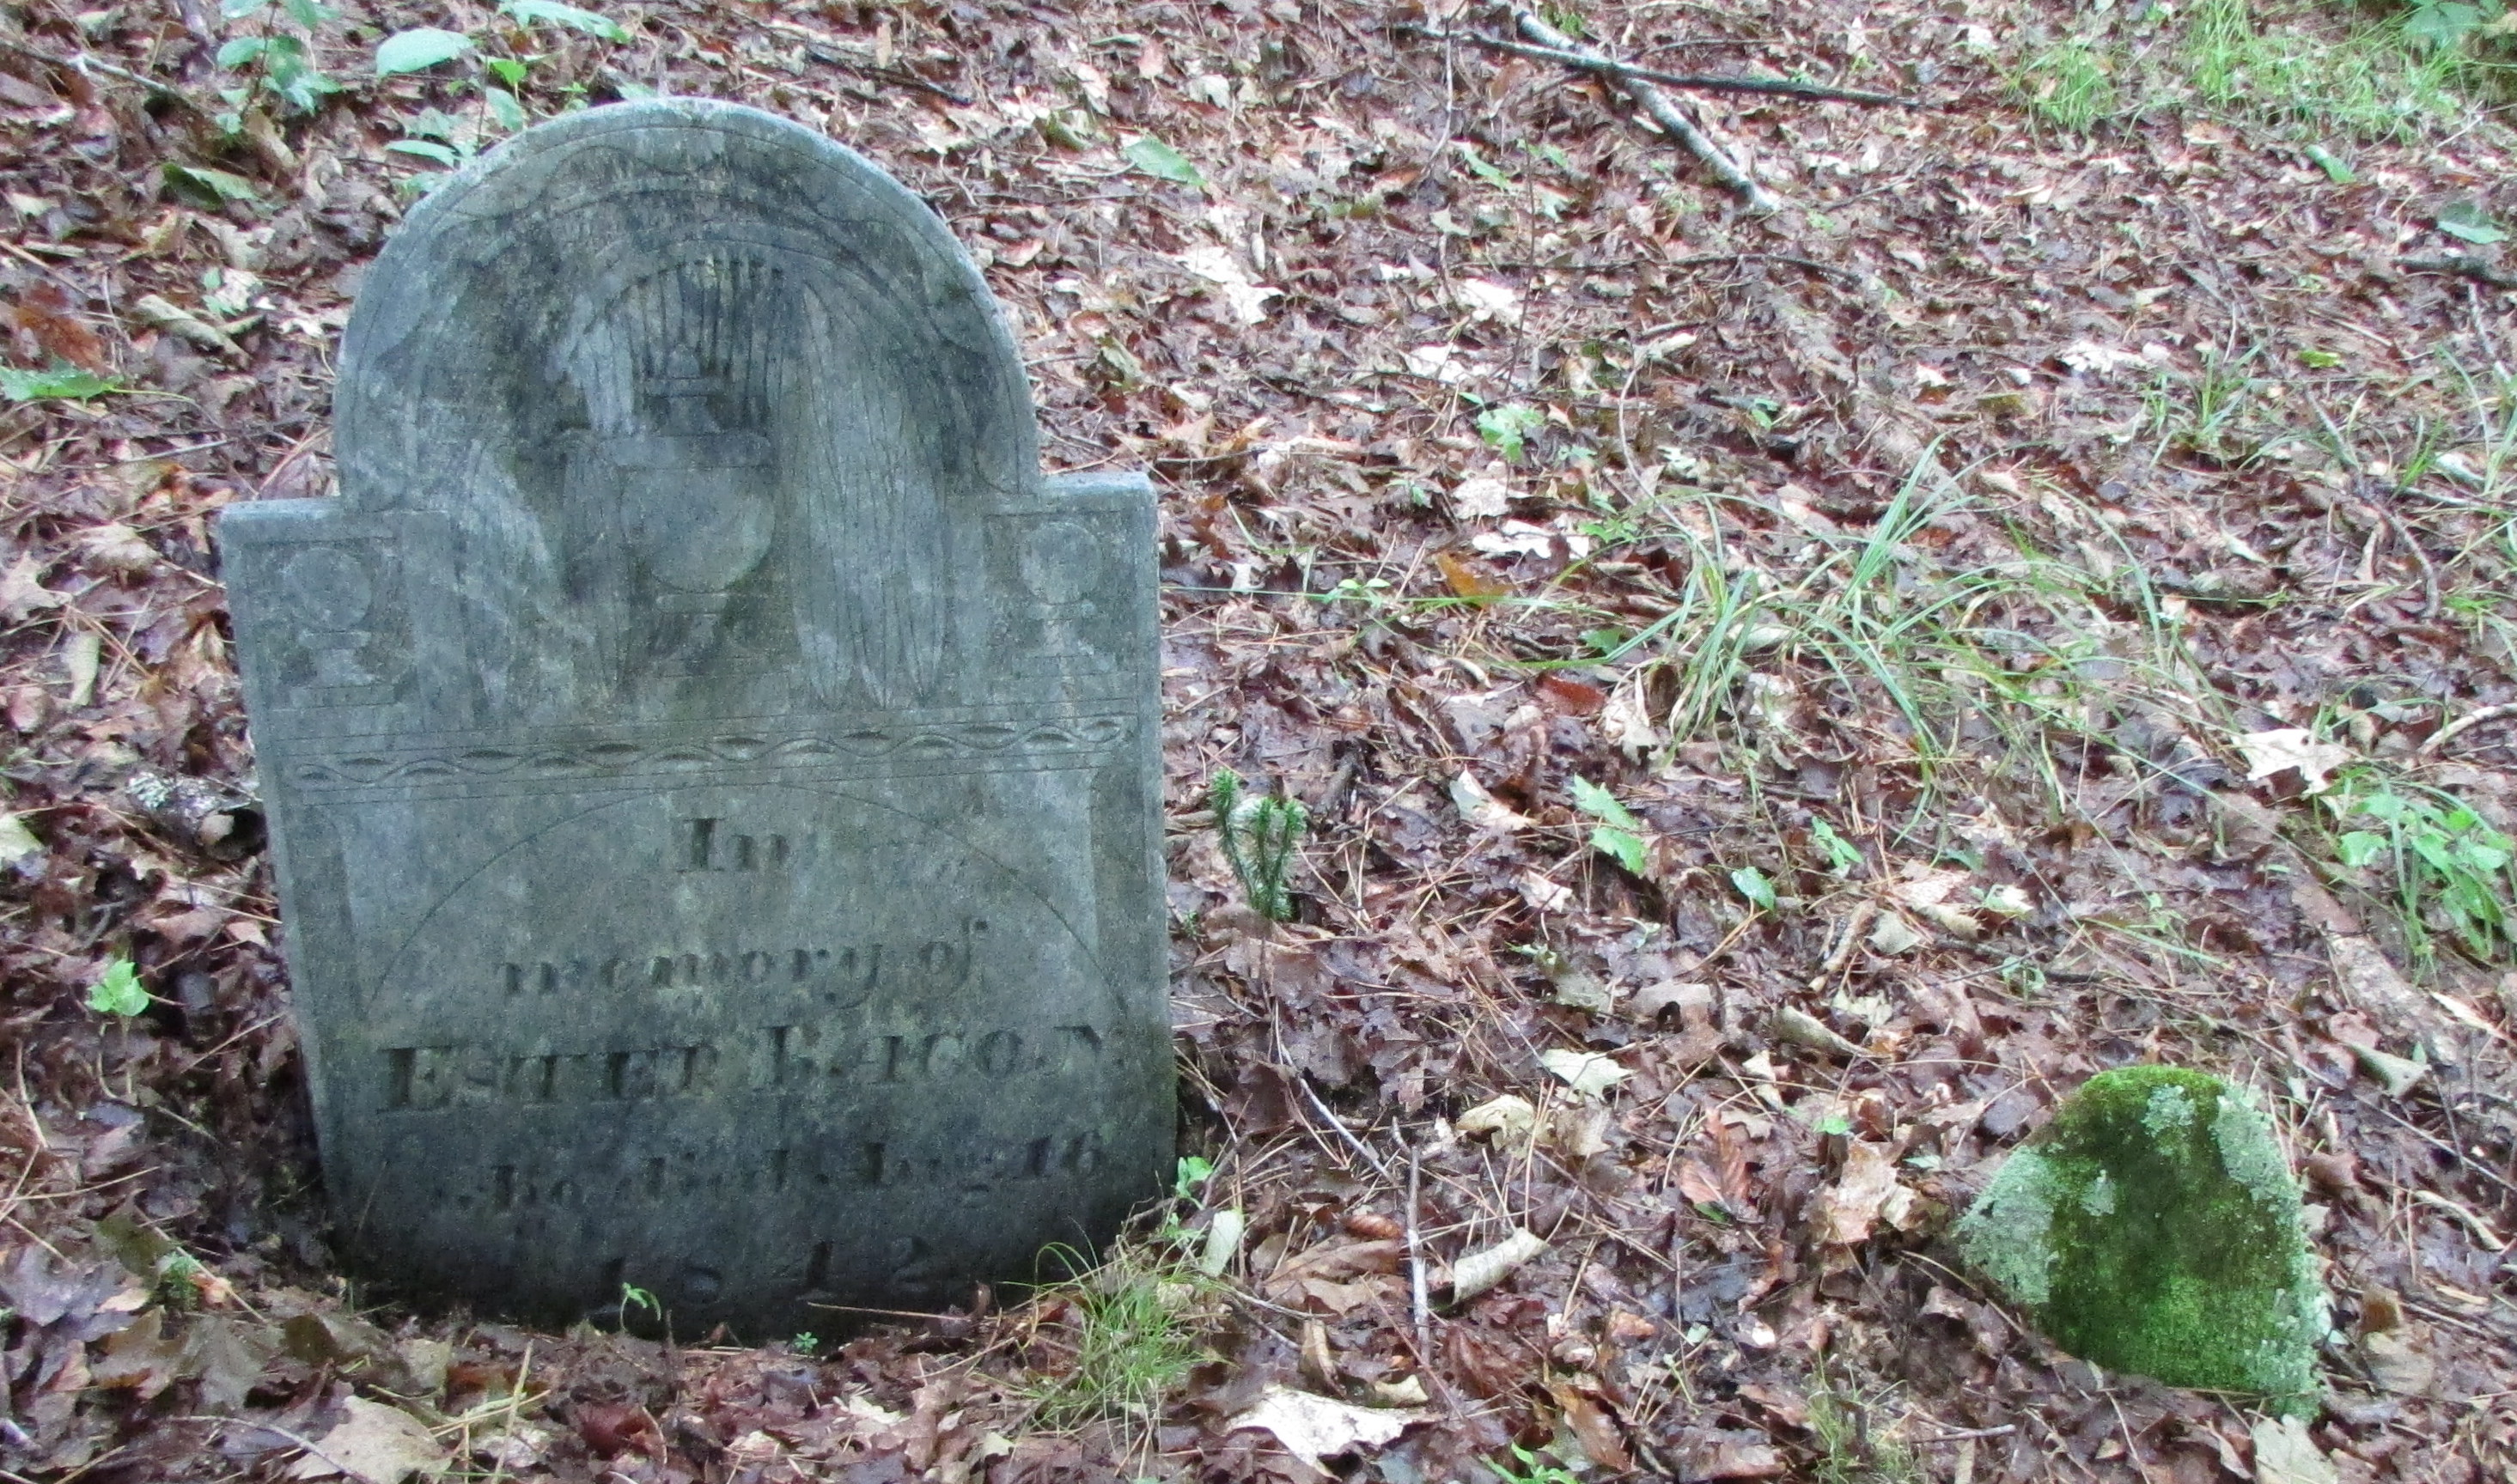 Gravestone of Esther (Elmer) Bacon, next to a possible unmarked child's stone